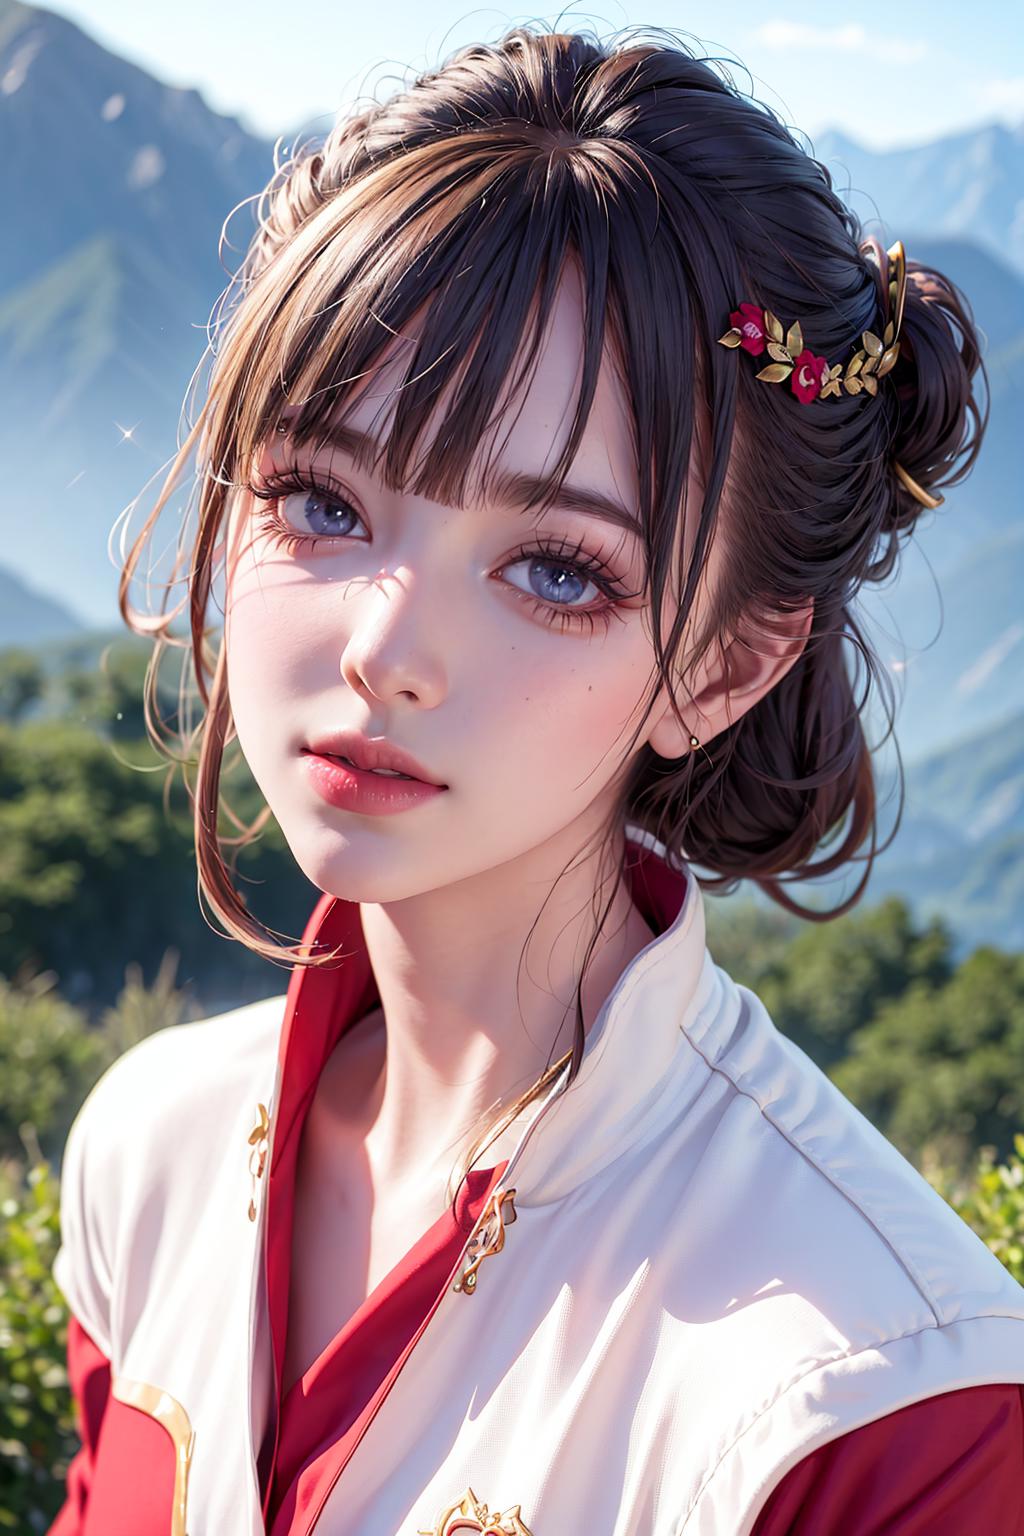 A beautiful young woman with long black hair and blue eyes wearing a white and red outfit. The image is set against a backdrop of a mountainous landscape.